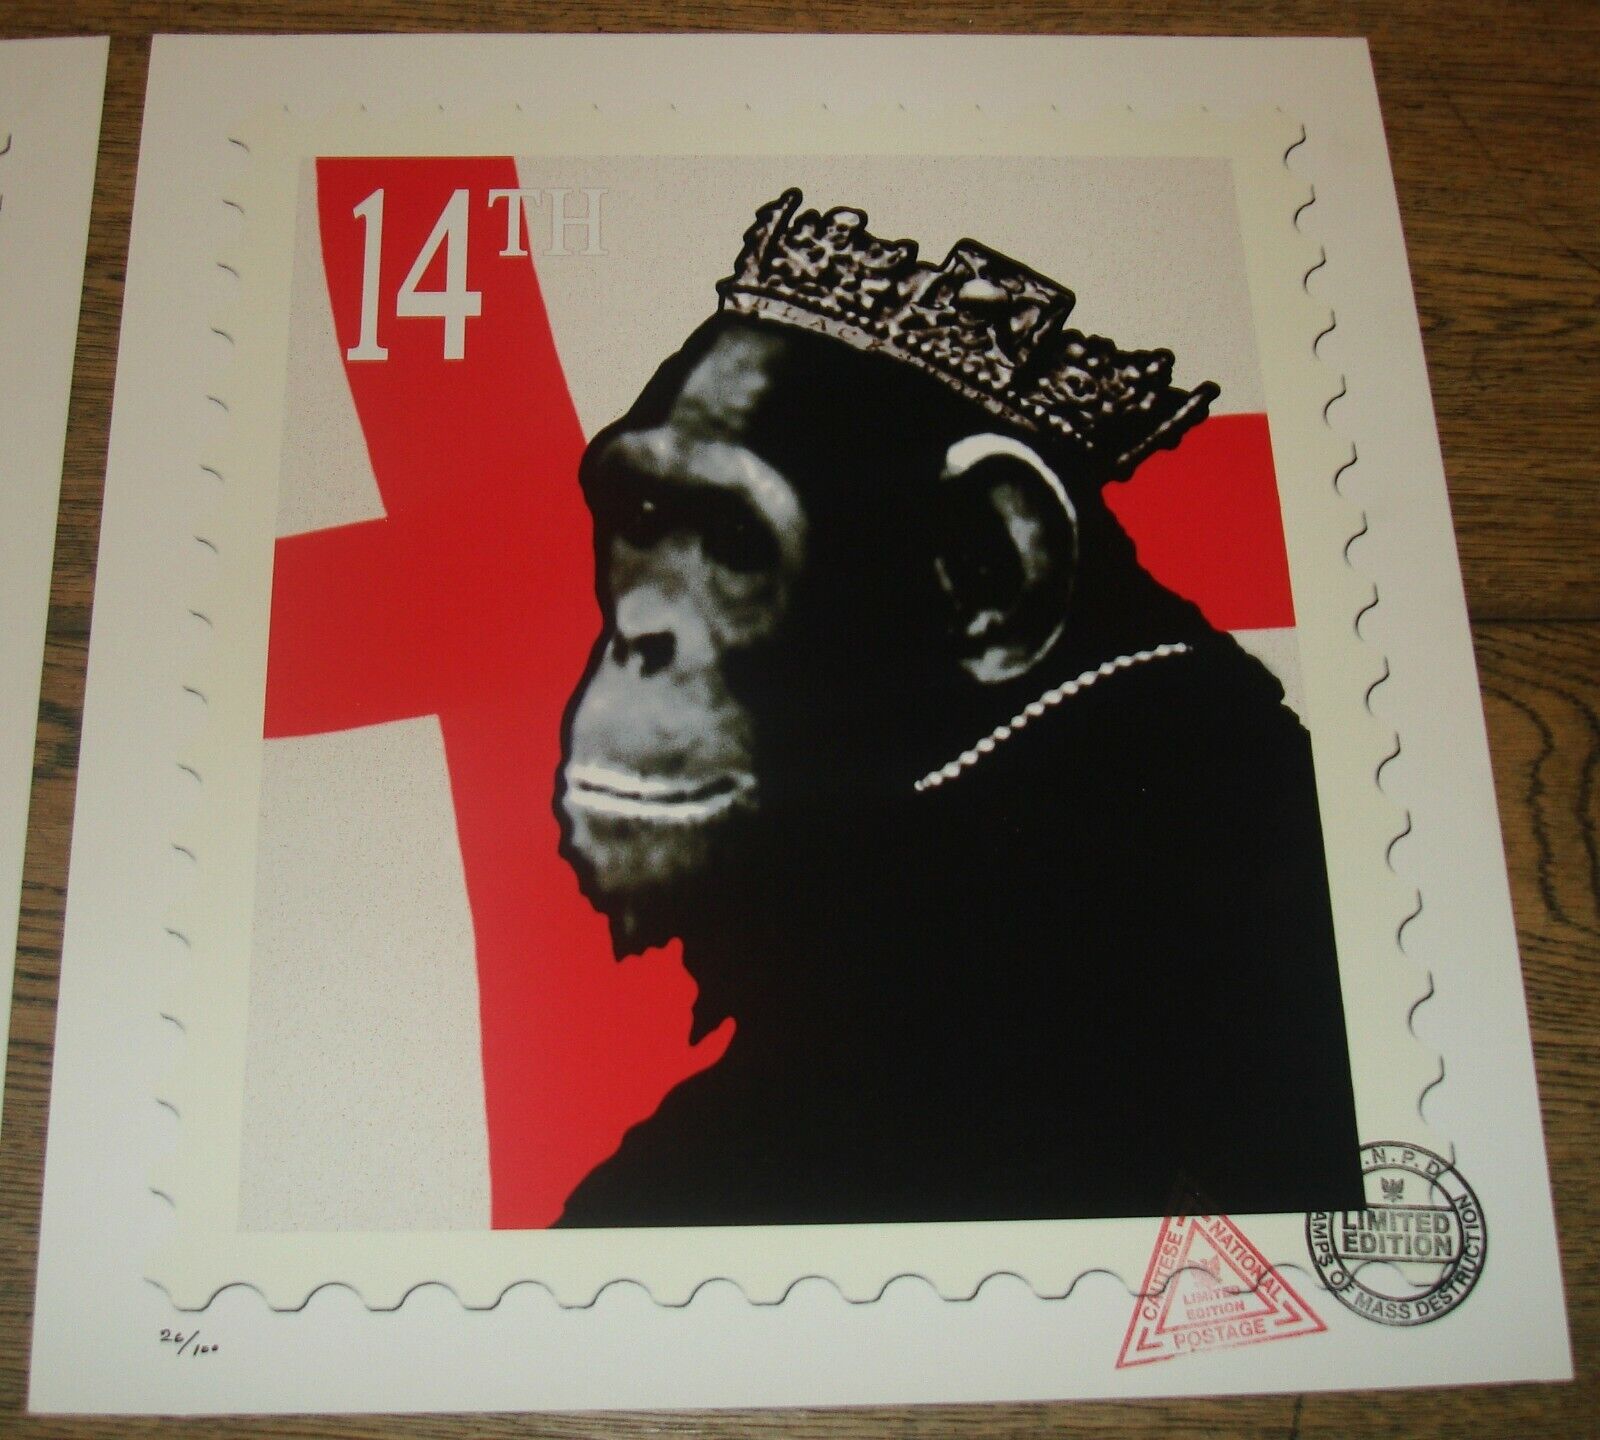 James Cauty - CNPD - Portslade Zoo 13th and 14th Class Pop Editions - Set of 2 with COA - Image 3 of 8